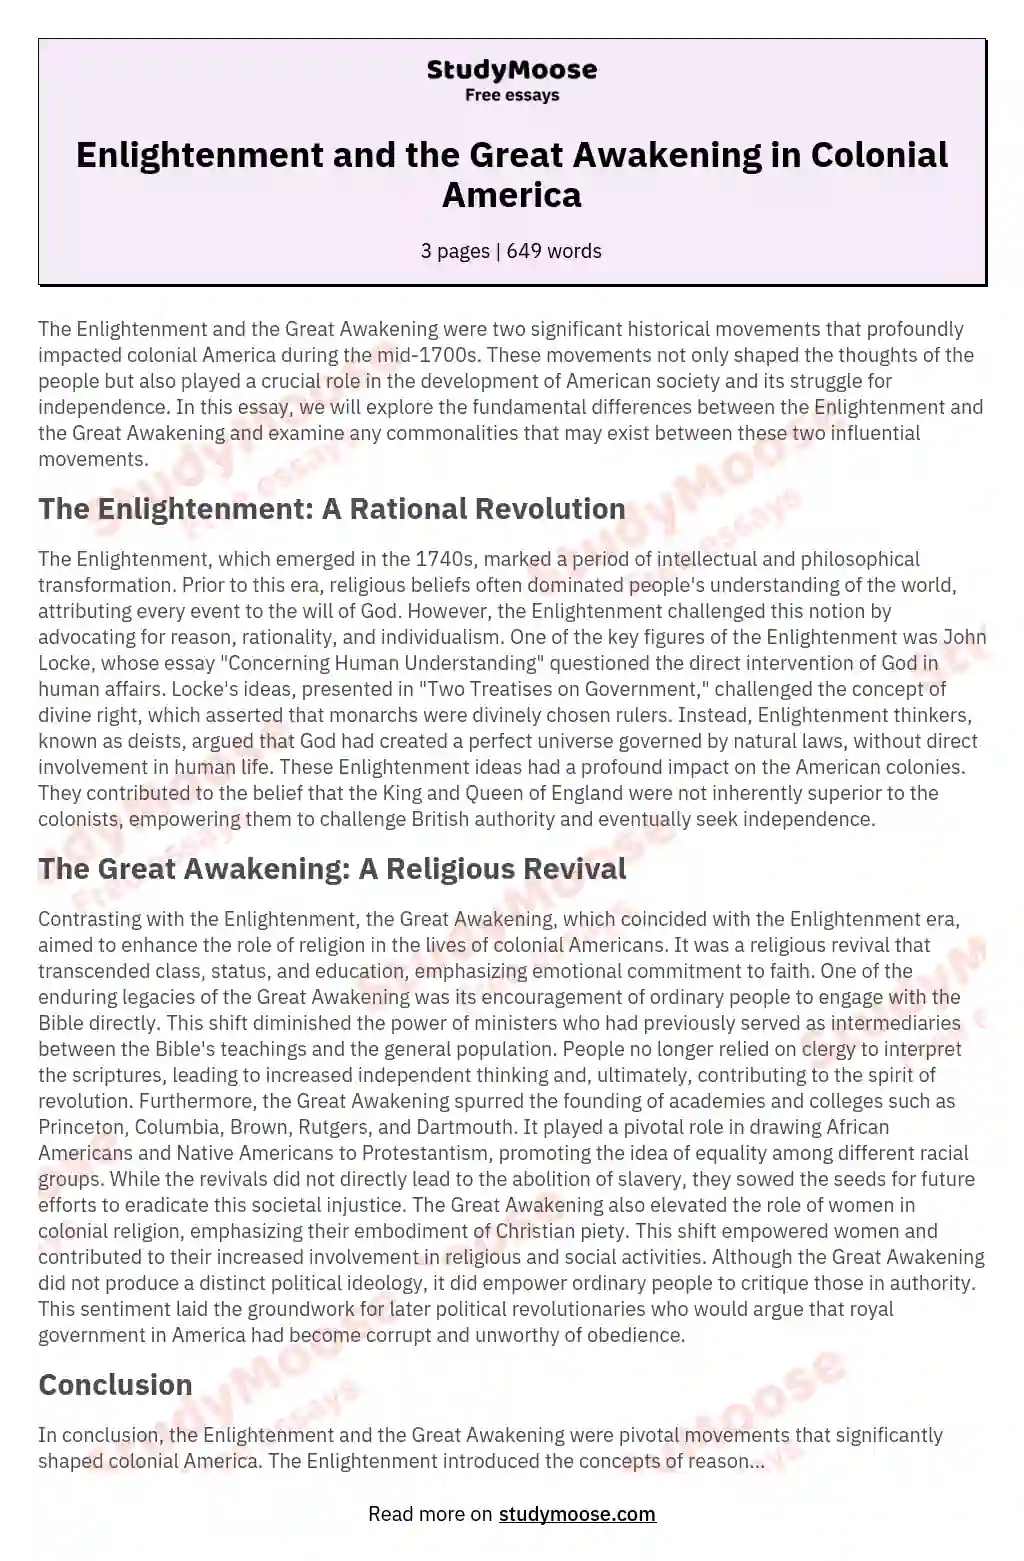 The Enlightenment and the Great Awakening movements